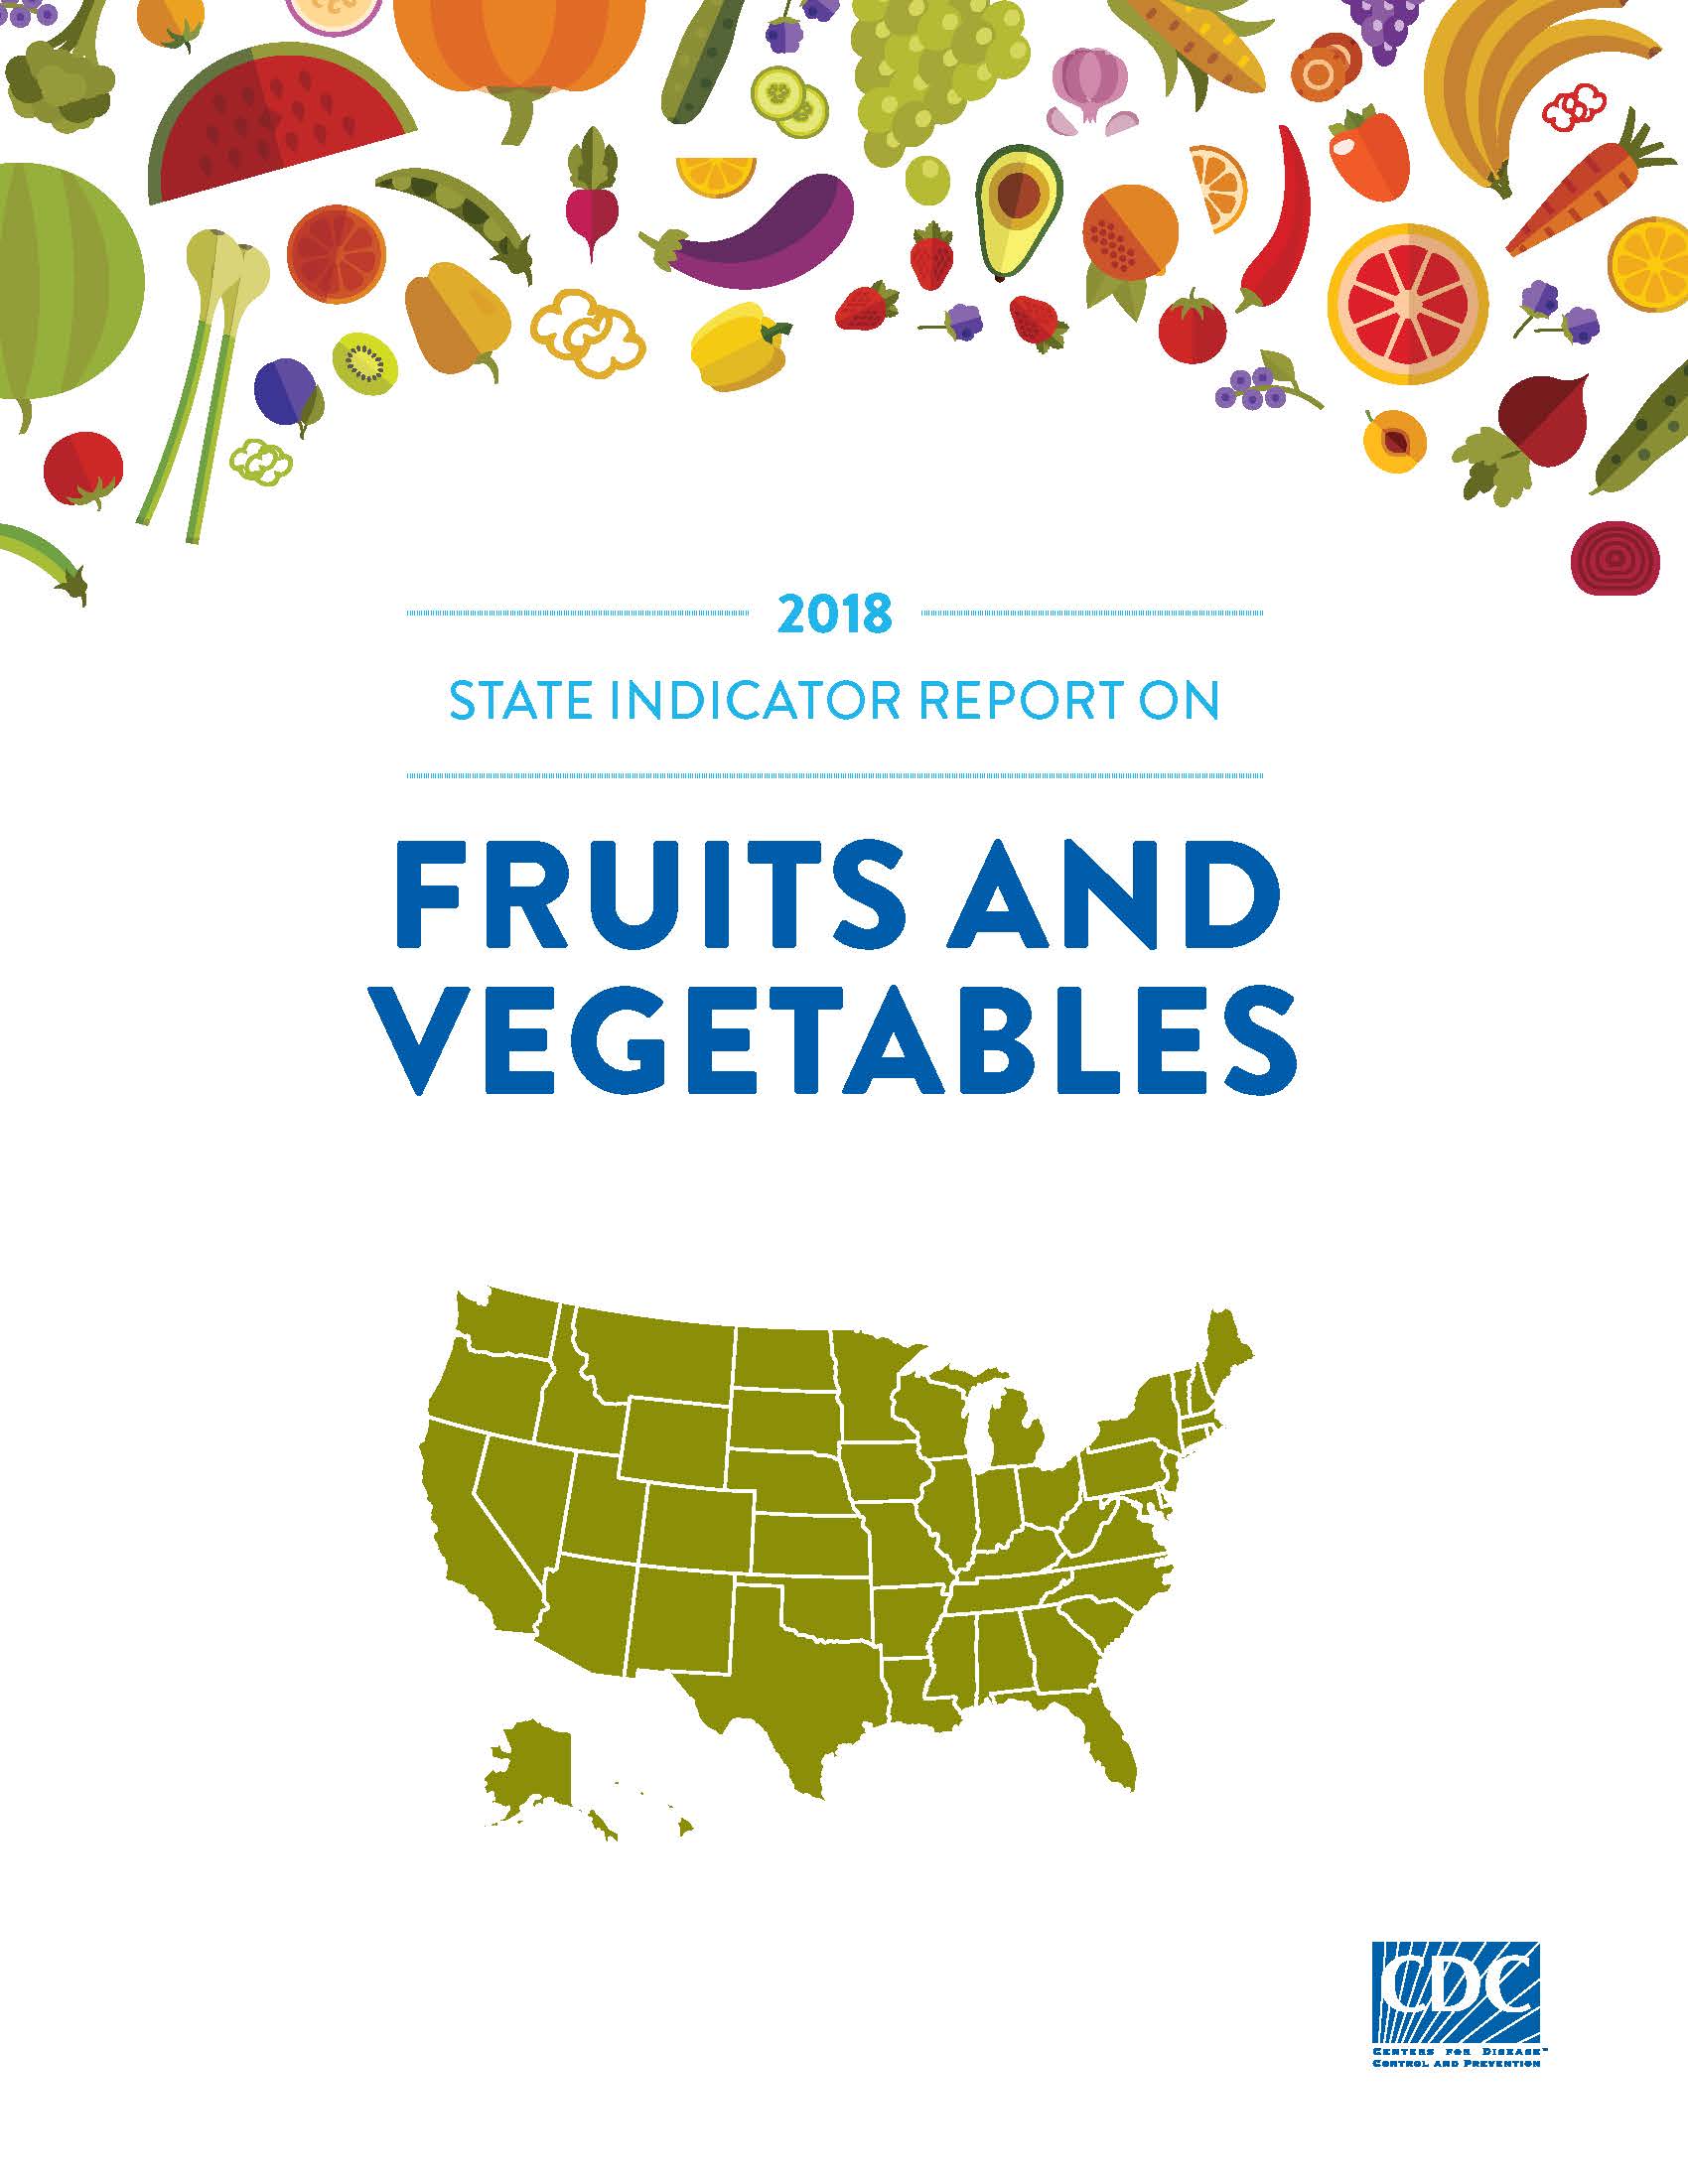 2018 State Indicator Report on Fruits and Vegetables